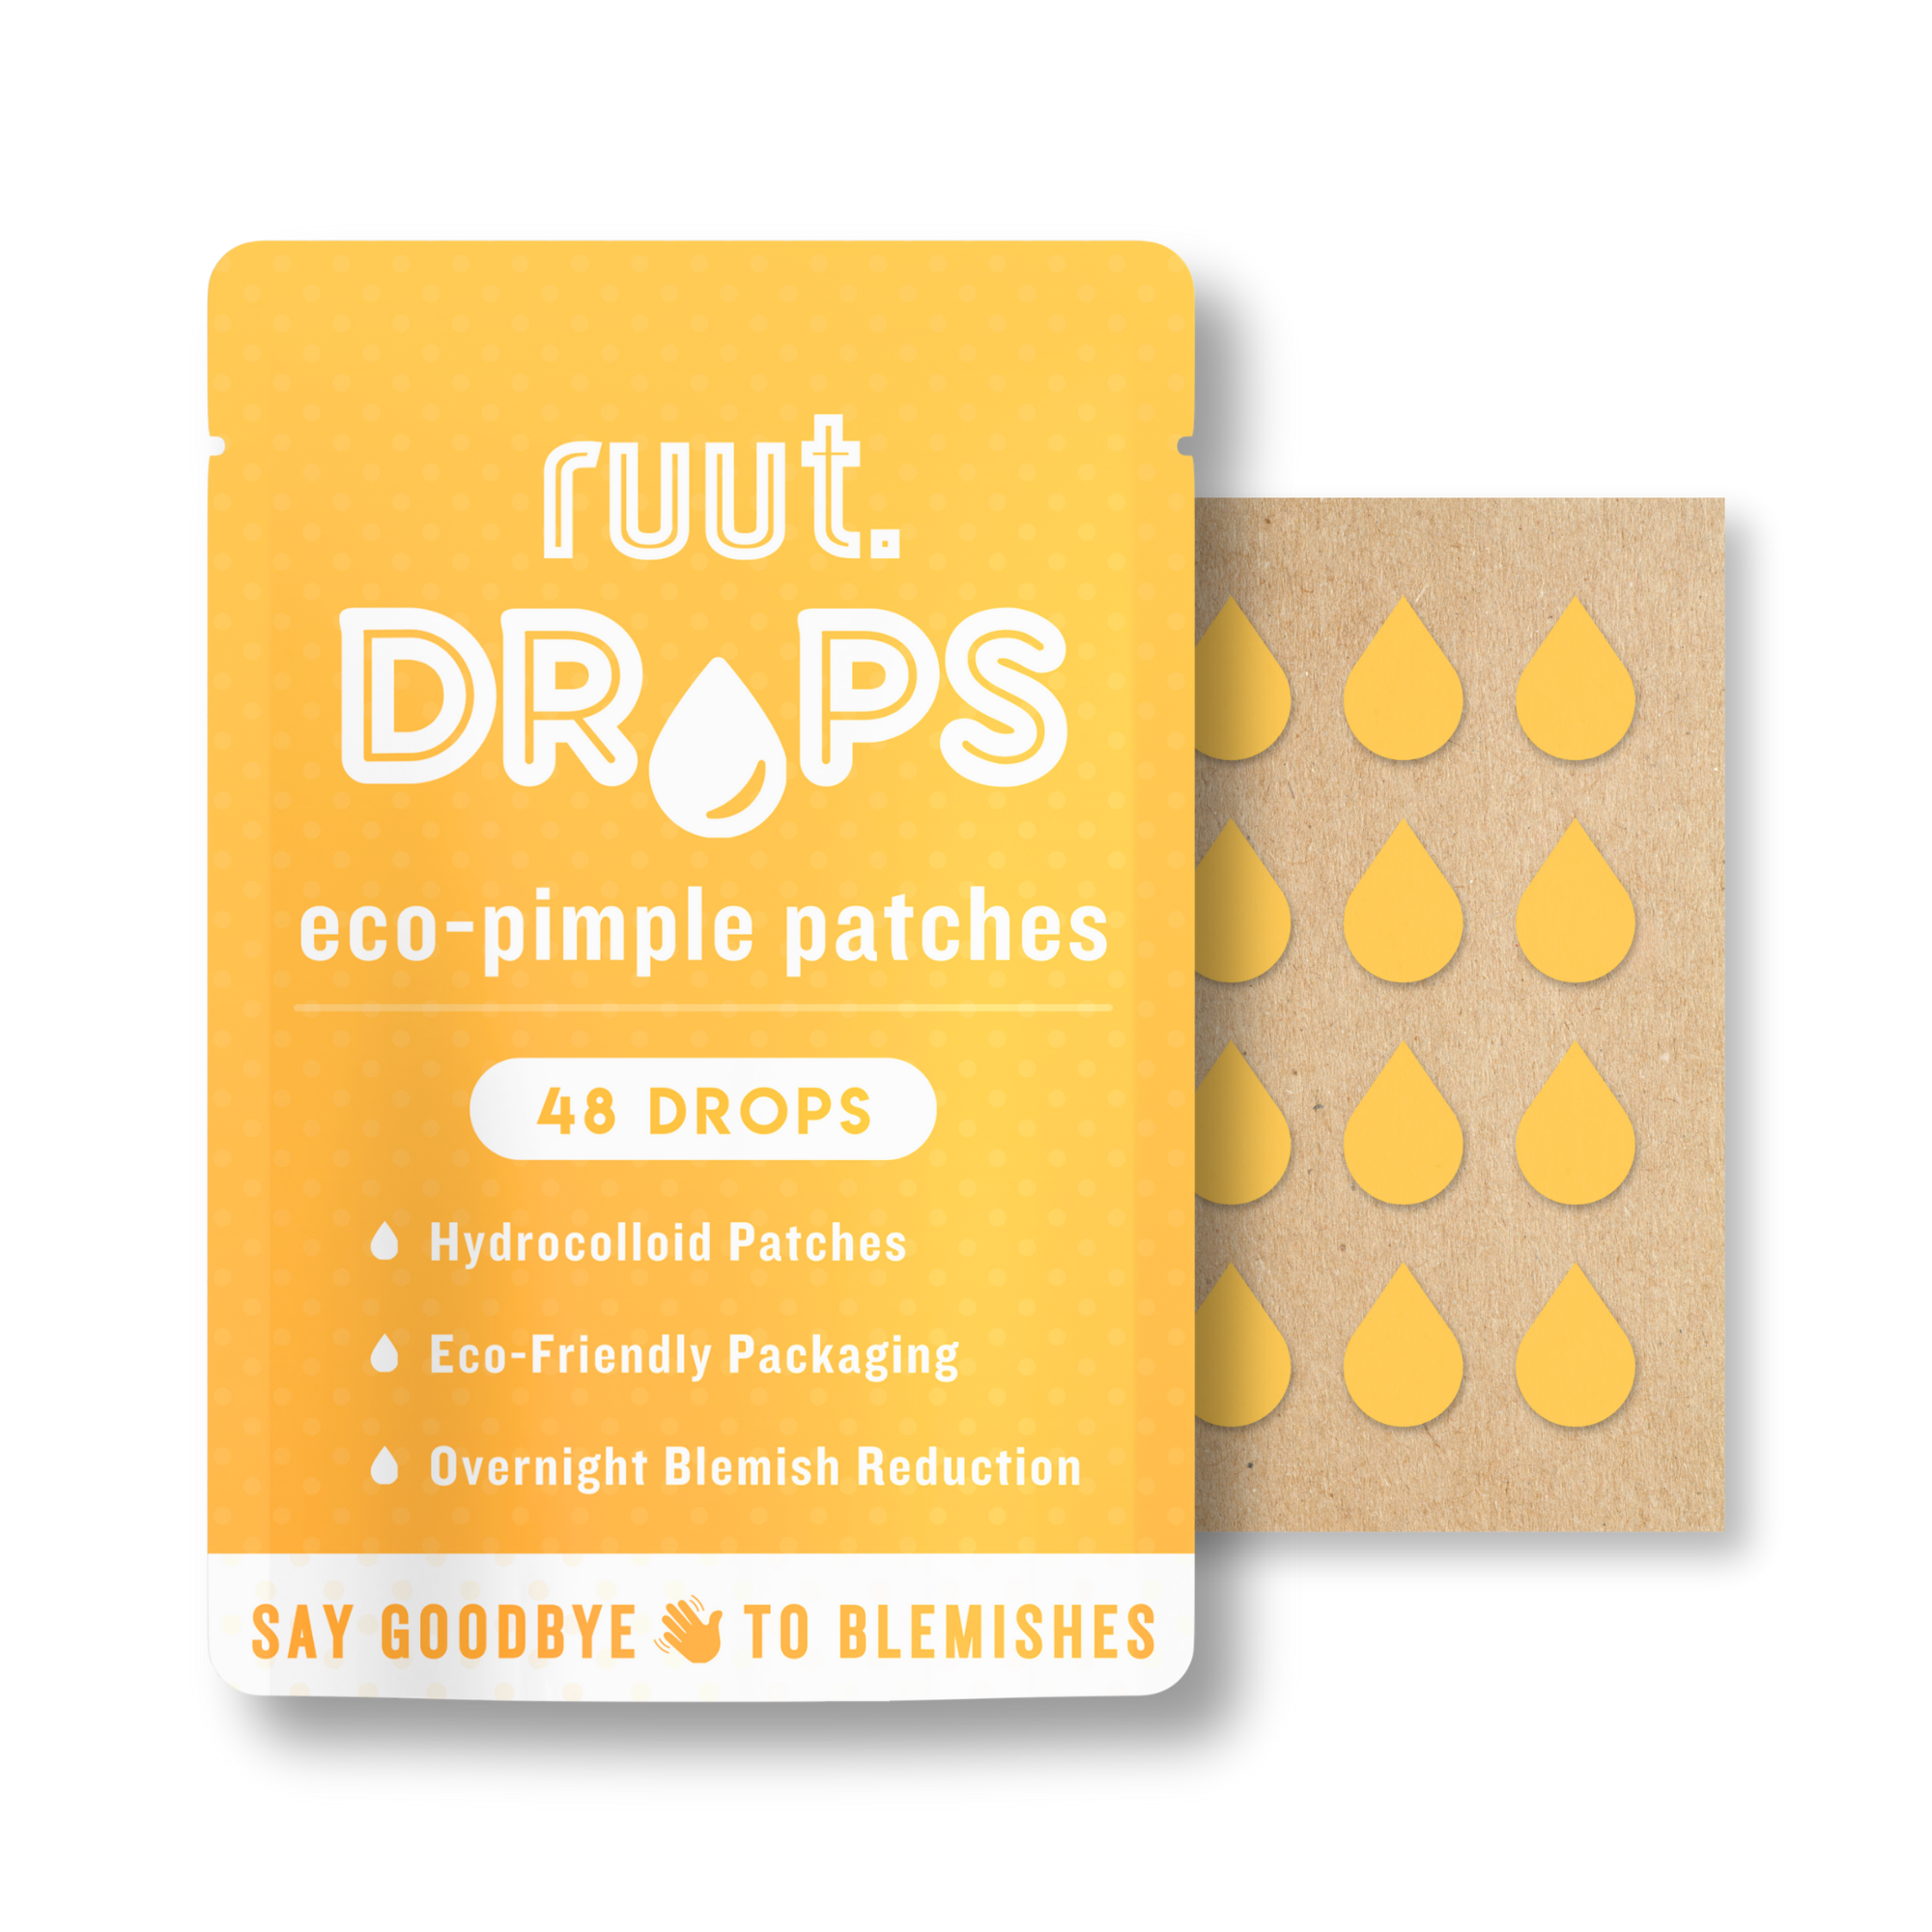 Pimple Patches | Invisible Spot Cover | Rael